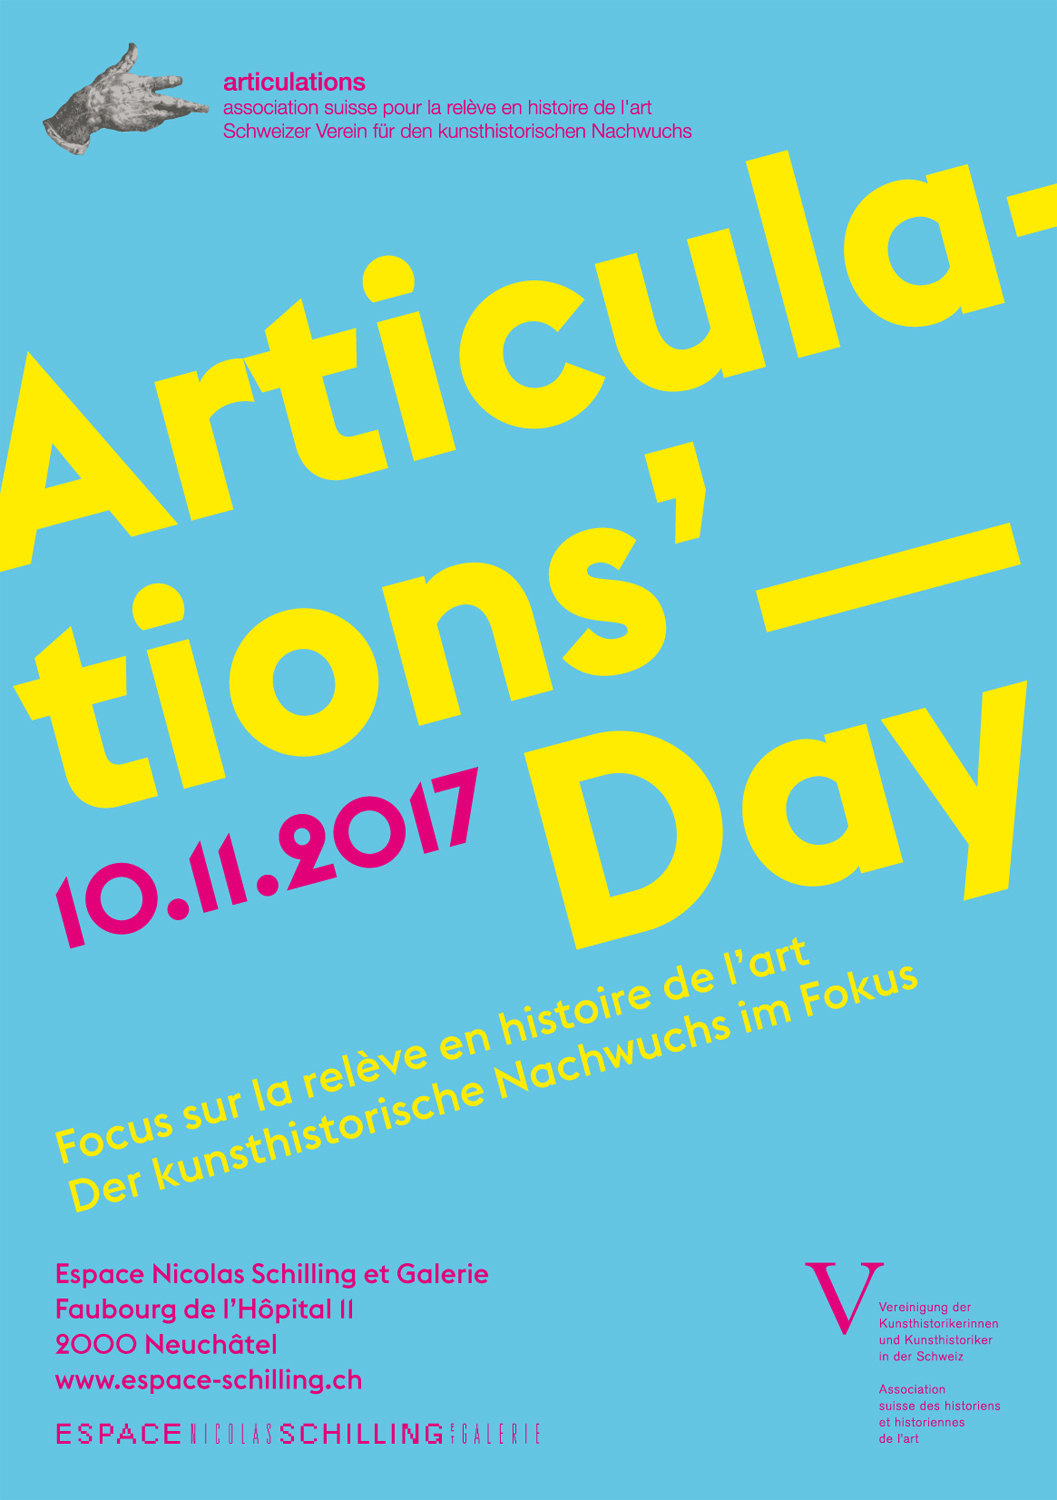 Articulations'Day 2017